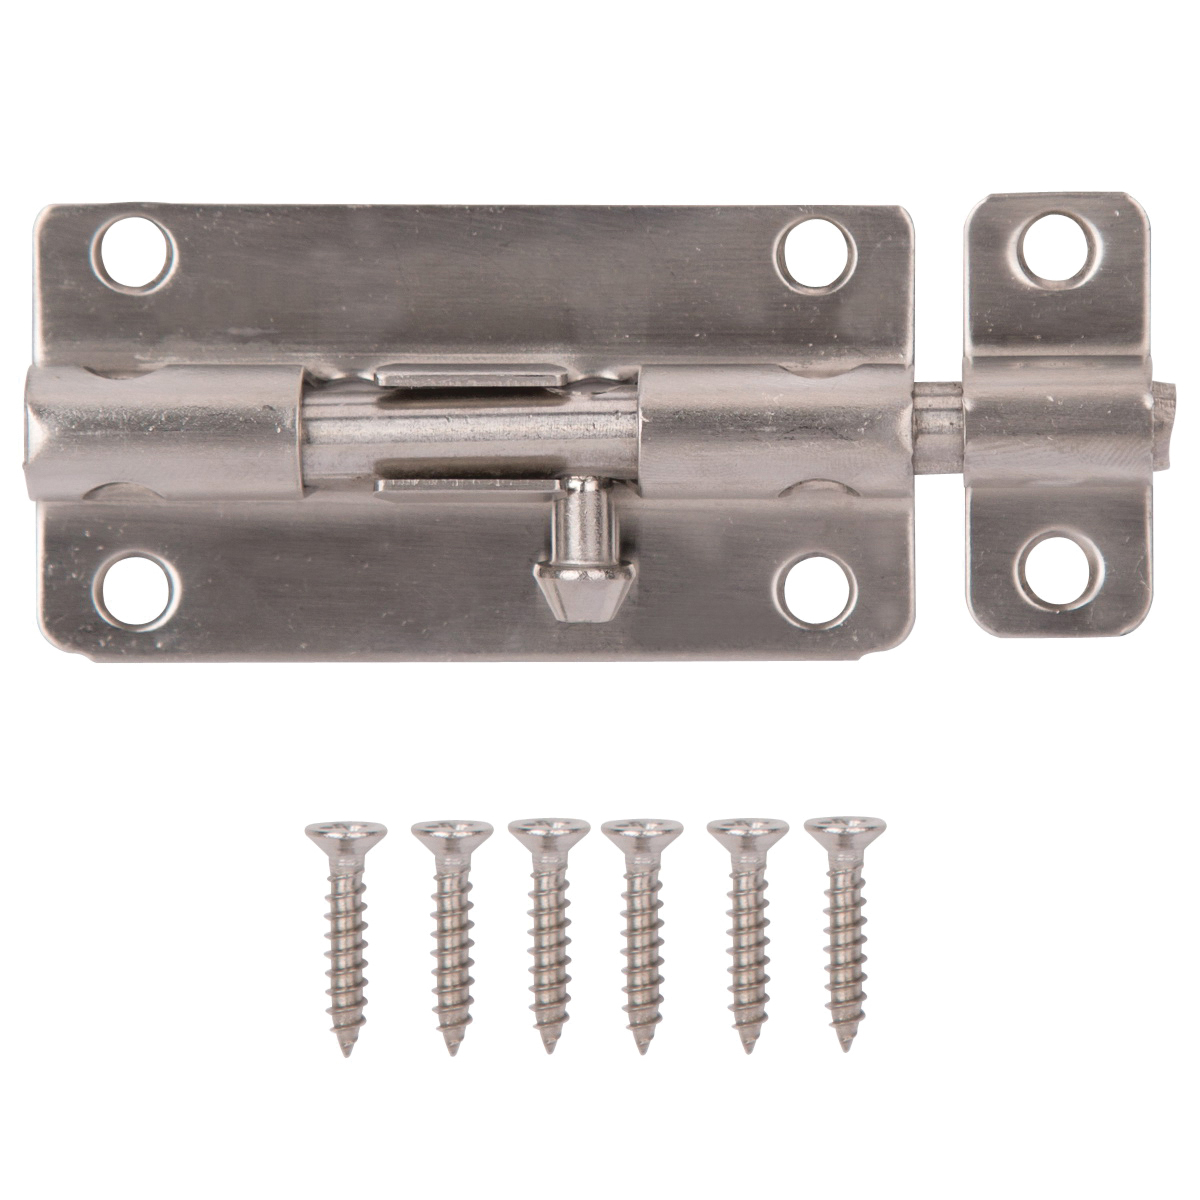 SS-B04-PS Barrel Bolt, 0.31 Dia in Bolt Head, 4 in L Bolt, Stainless Steel, Stainless Steel